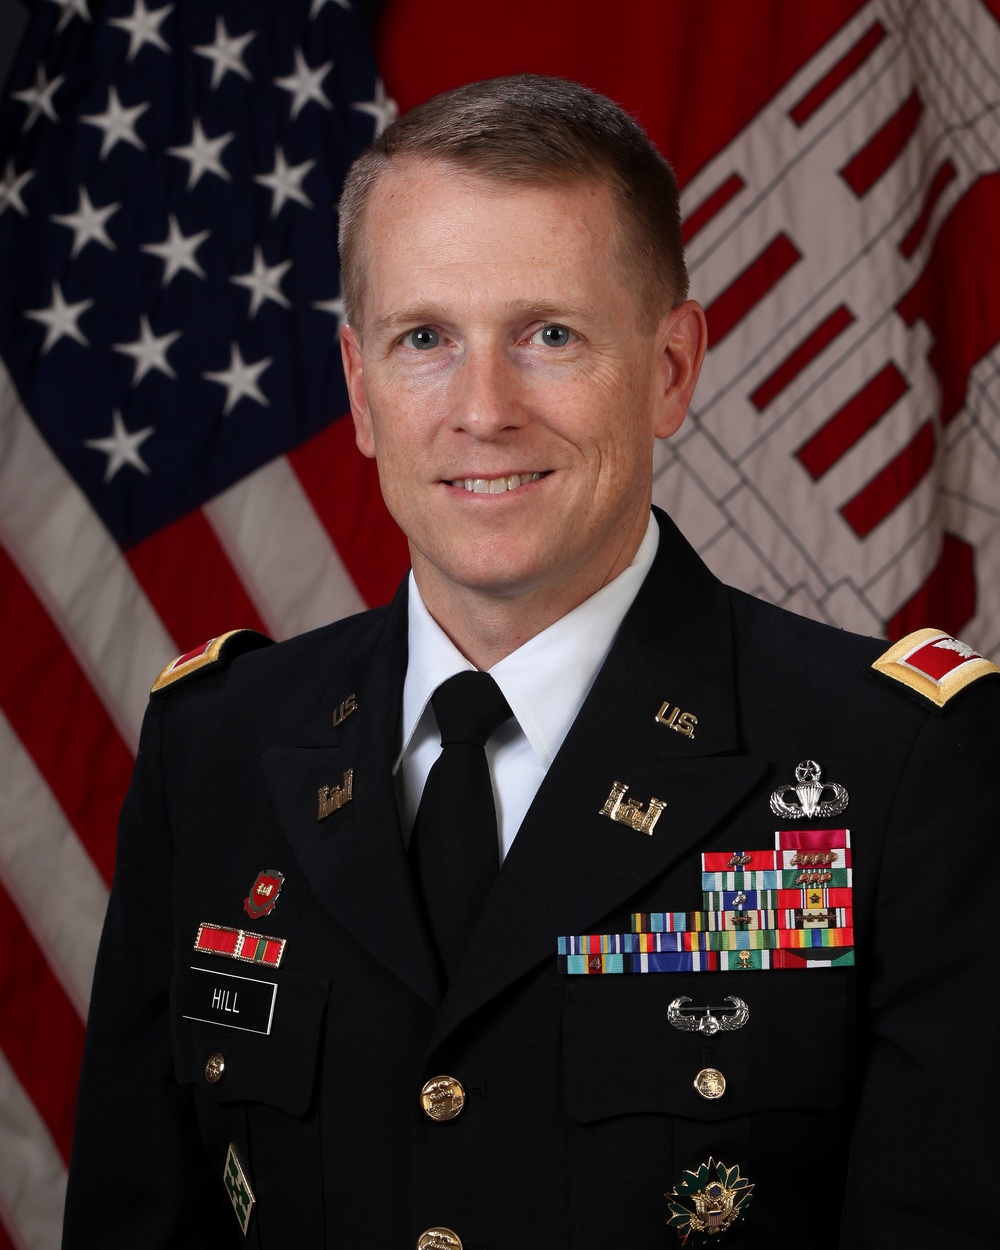 Hill to take command of Corps’ Southwestern Division, confirmed for brigadier general